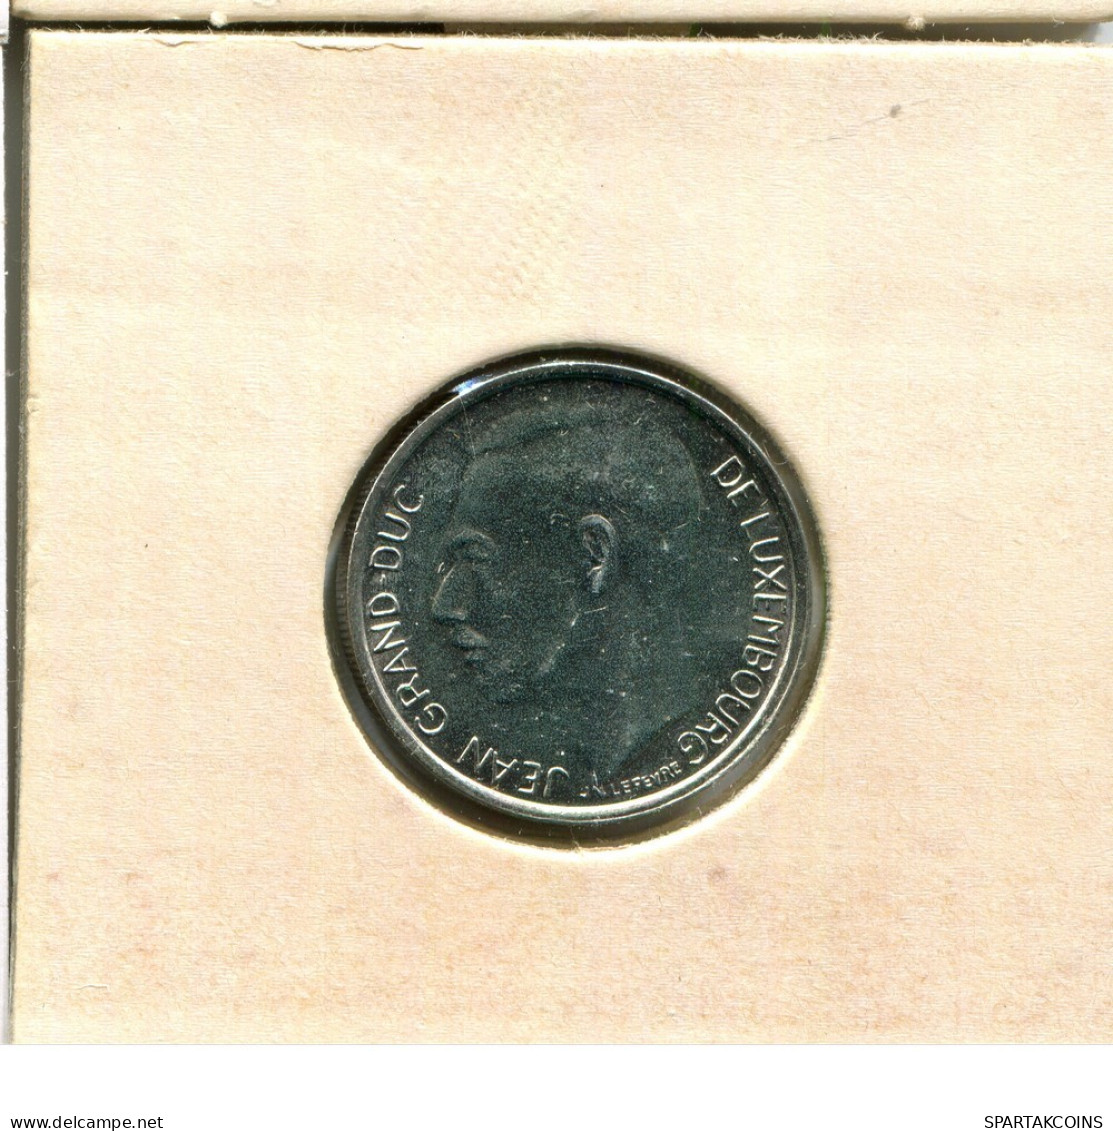 1 FRANC 1978 LUXEMBURG LUXEMBOURG Münze #AT214.D.A - Luxemburgo